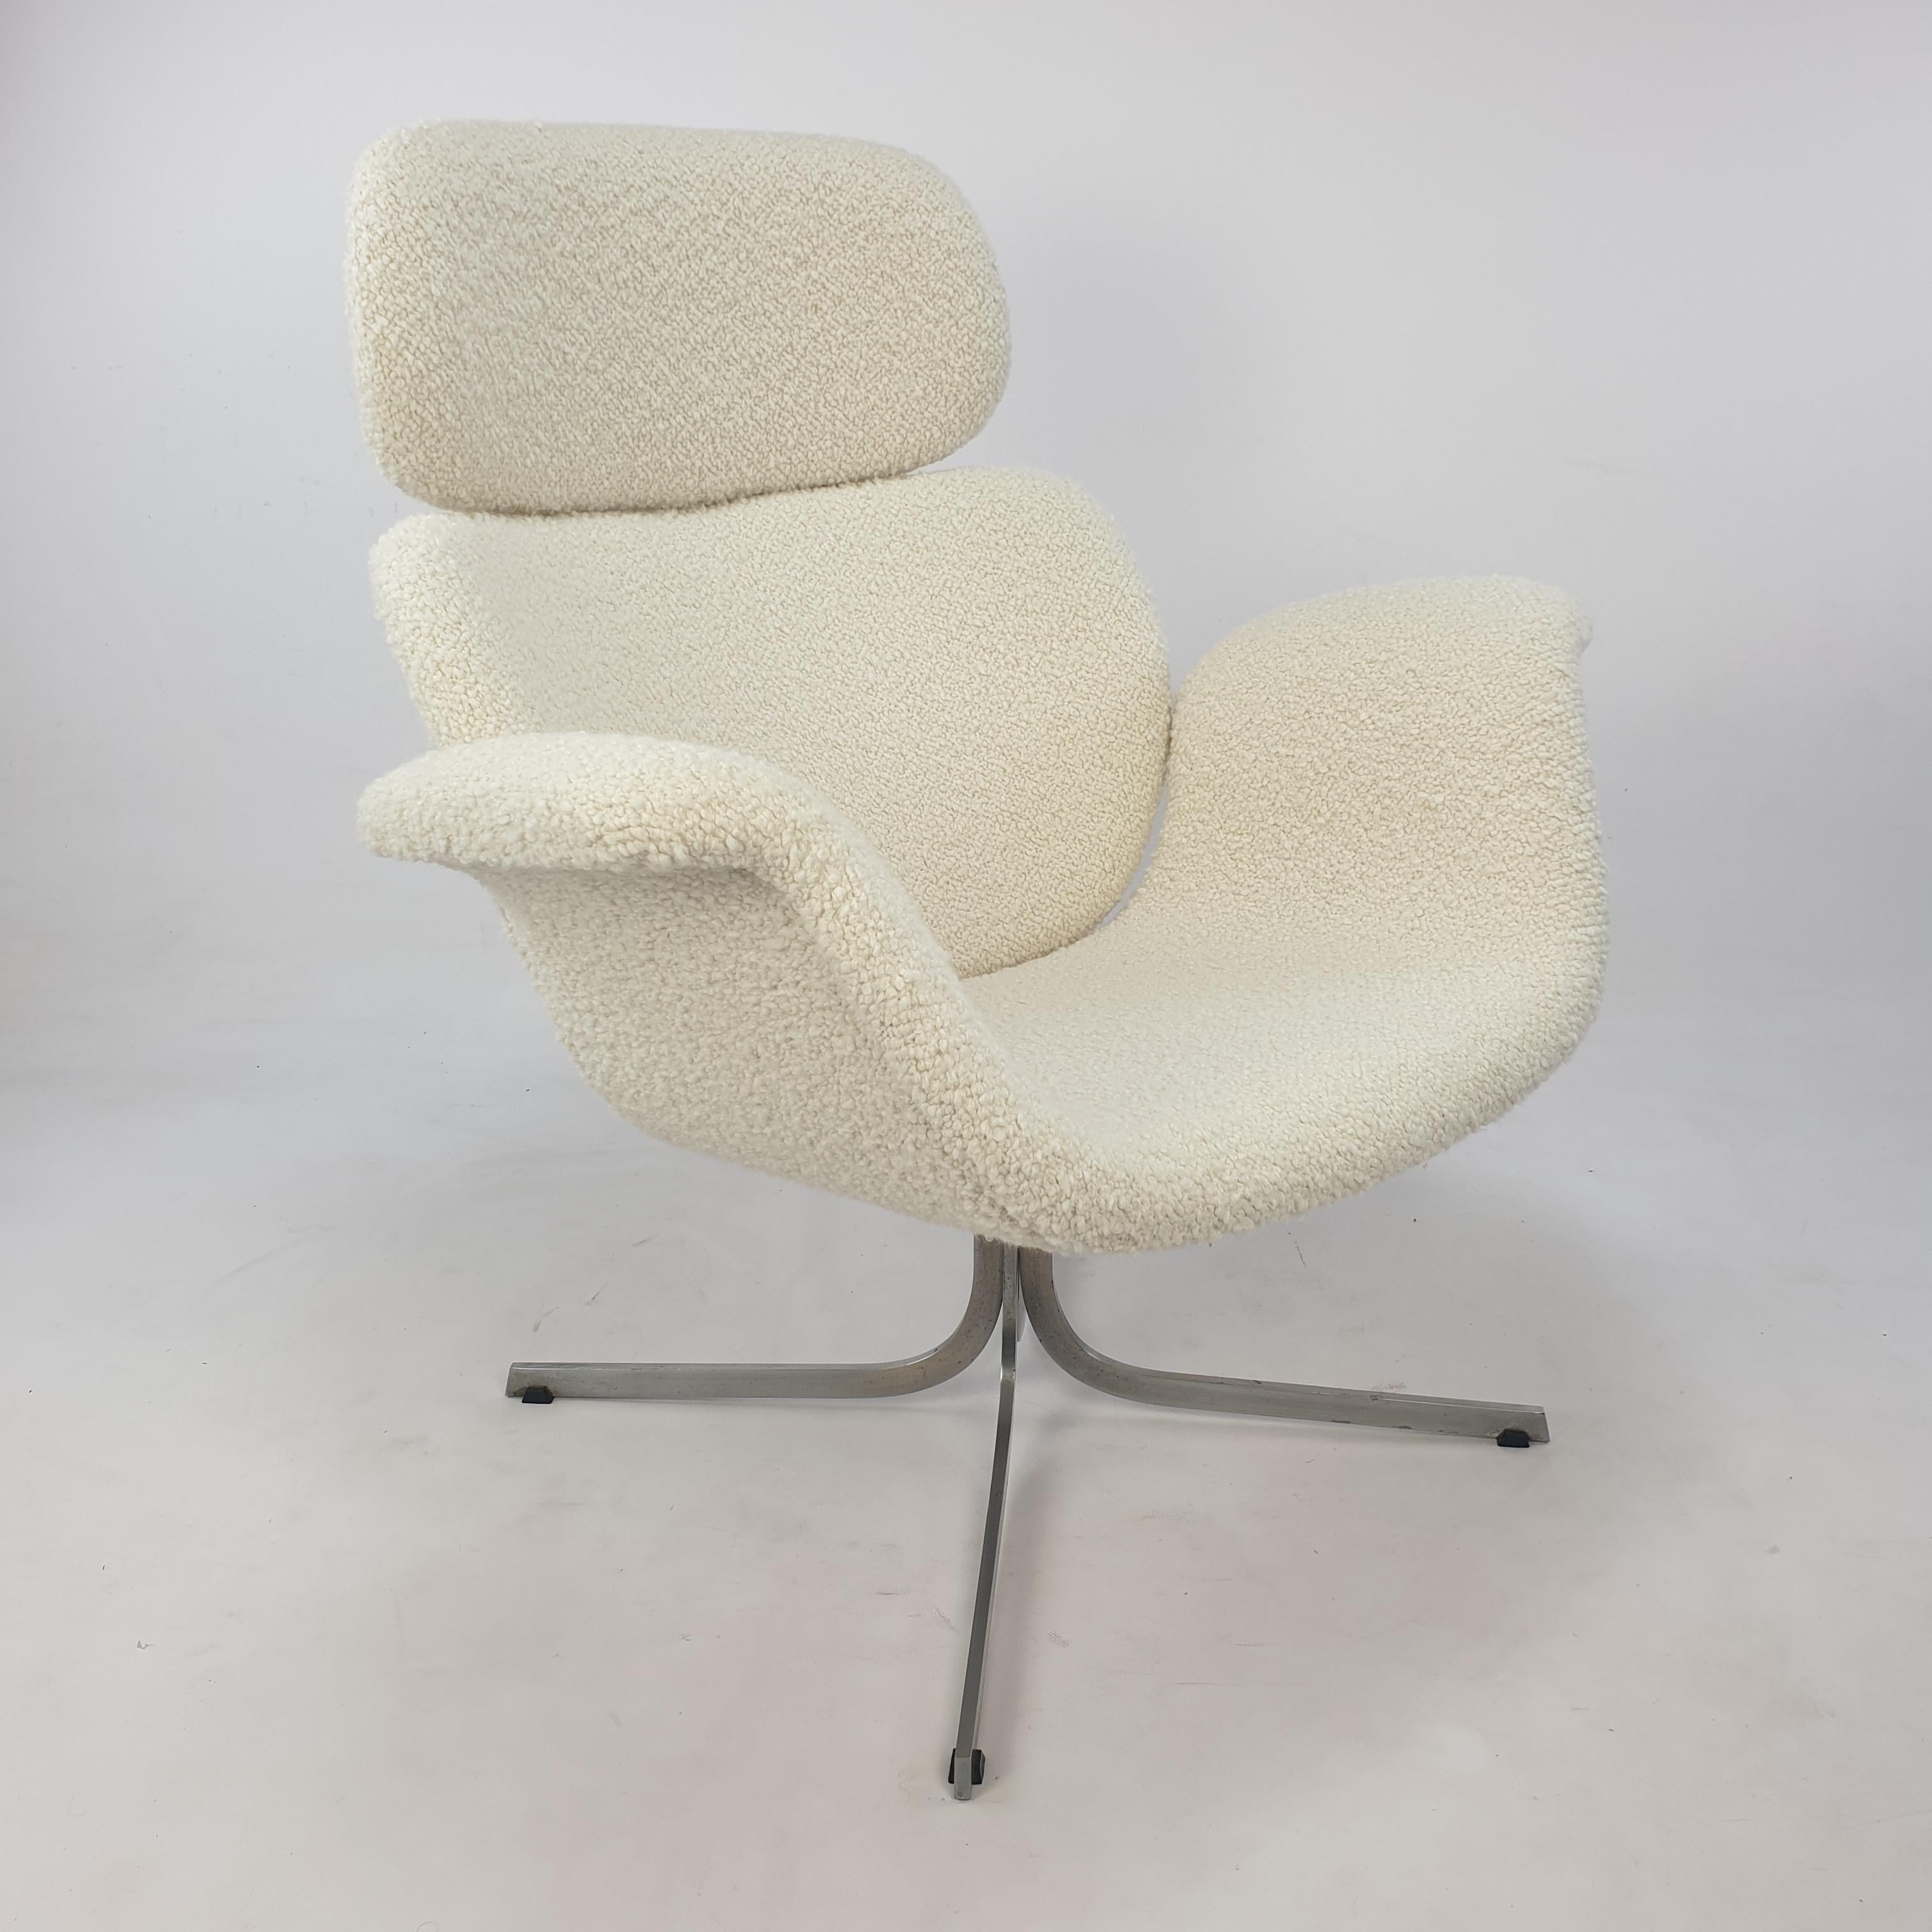 Very comfortable and original Big Tulip lounge chair, designed by Pierre Paulin for Artifort in 1965. This model remains one of the best known of the Pierre Paulin's work. The chair is just reupholstered with lovely Italian bouclé fabric and new